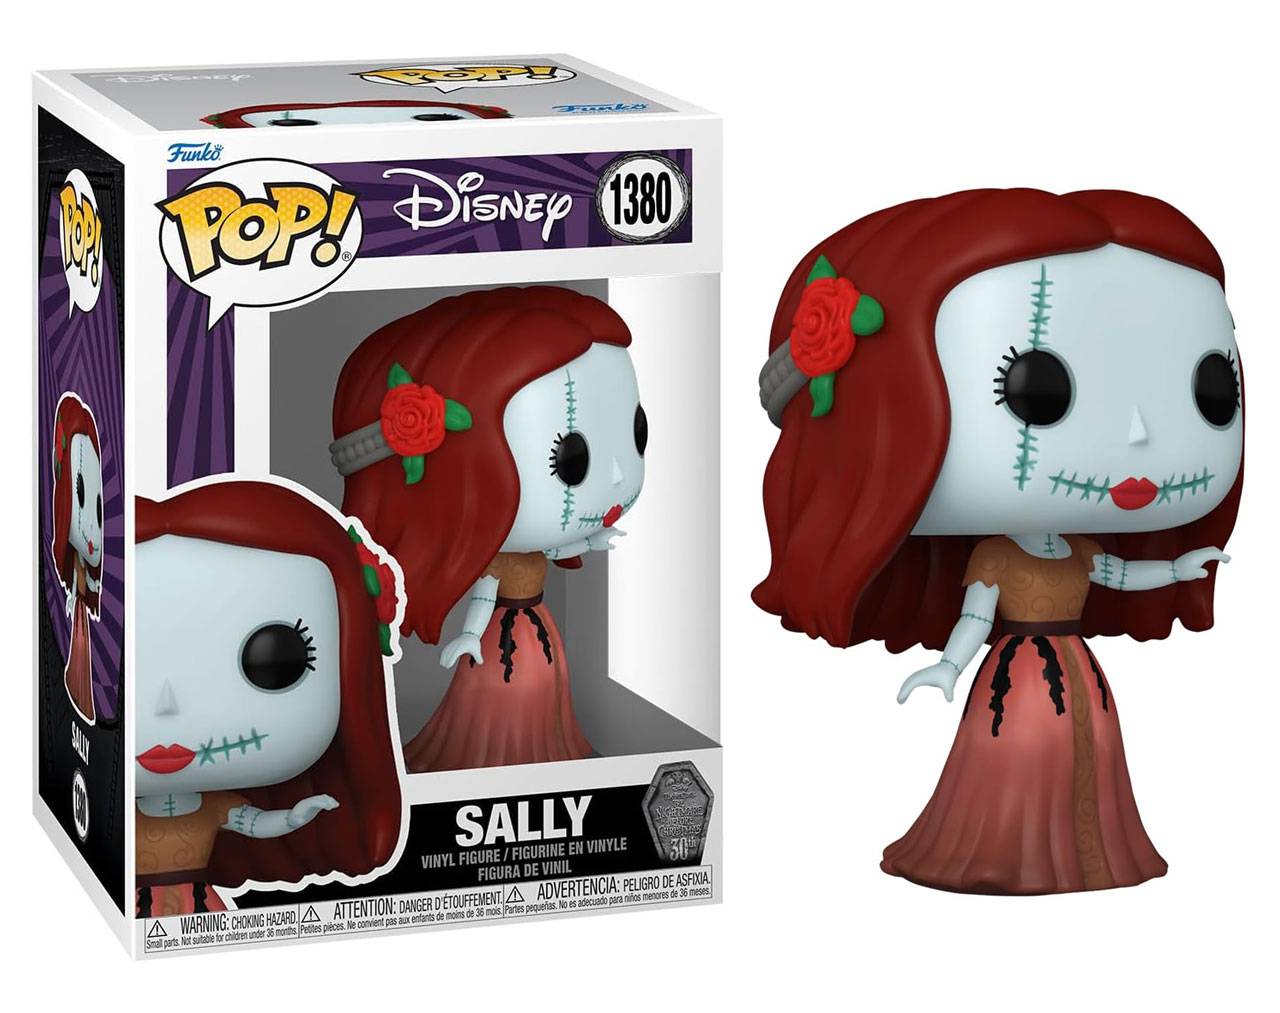 Sally in Formal Dress - The Night Before Christmas 30th Anniversary Pop! Vinyl